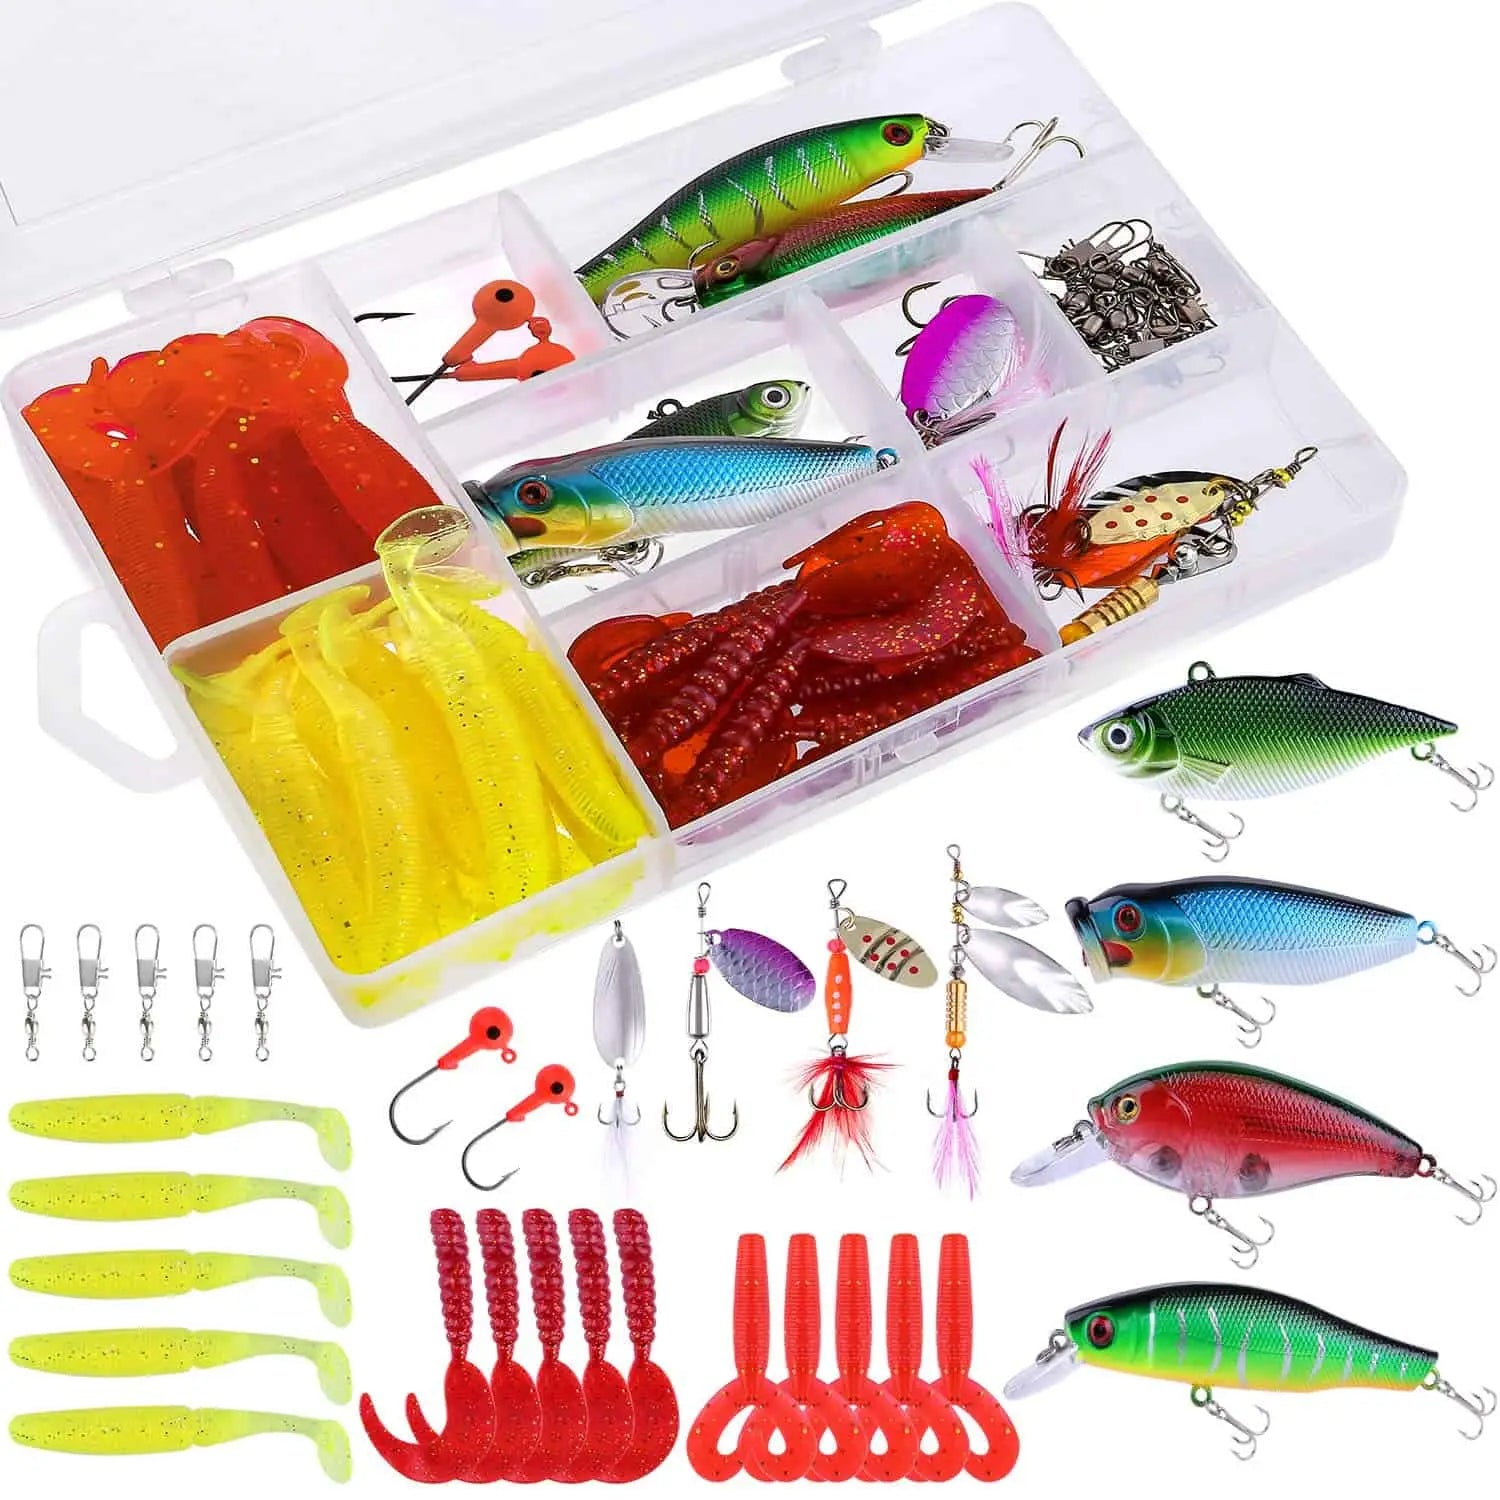  PLUSINNO Fishing Lures Baits Tackle, BEST BASS Fishing Lures  Including Crankbaits, Spinnerbaits, Plastic worms, Jigs, Topwater Lures ,  Tackle Box and More Fishing Gear Lures Kit Set : Sports & Outdoors